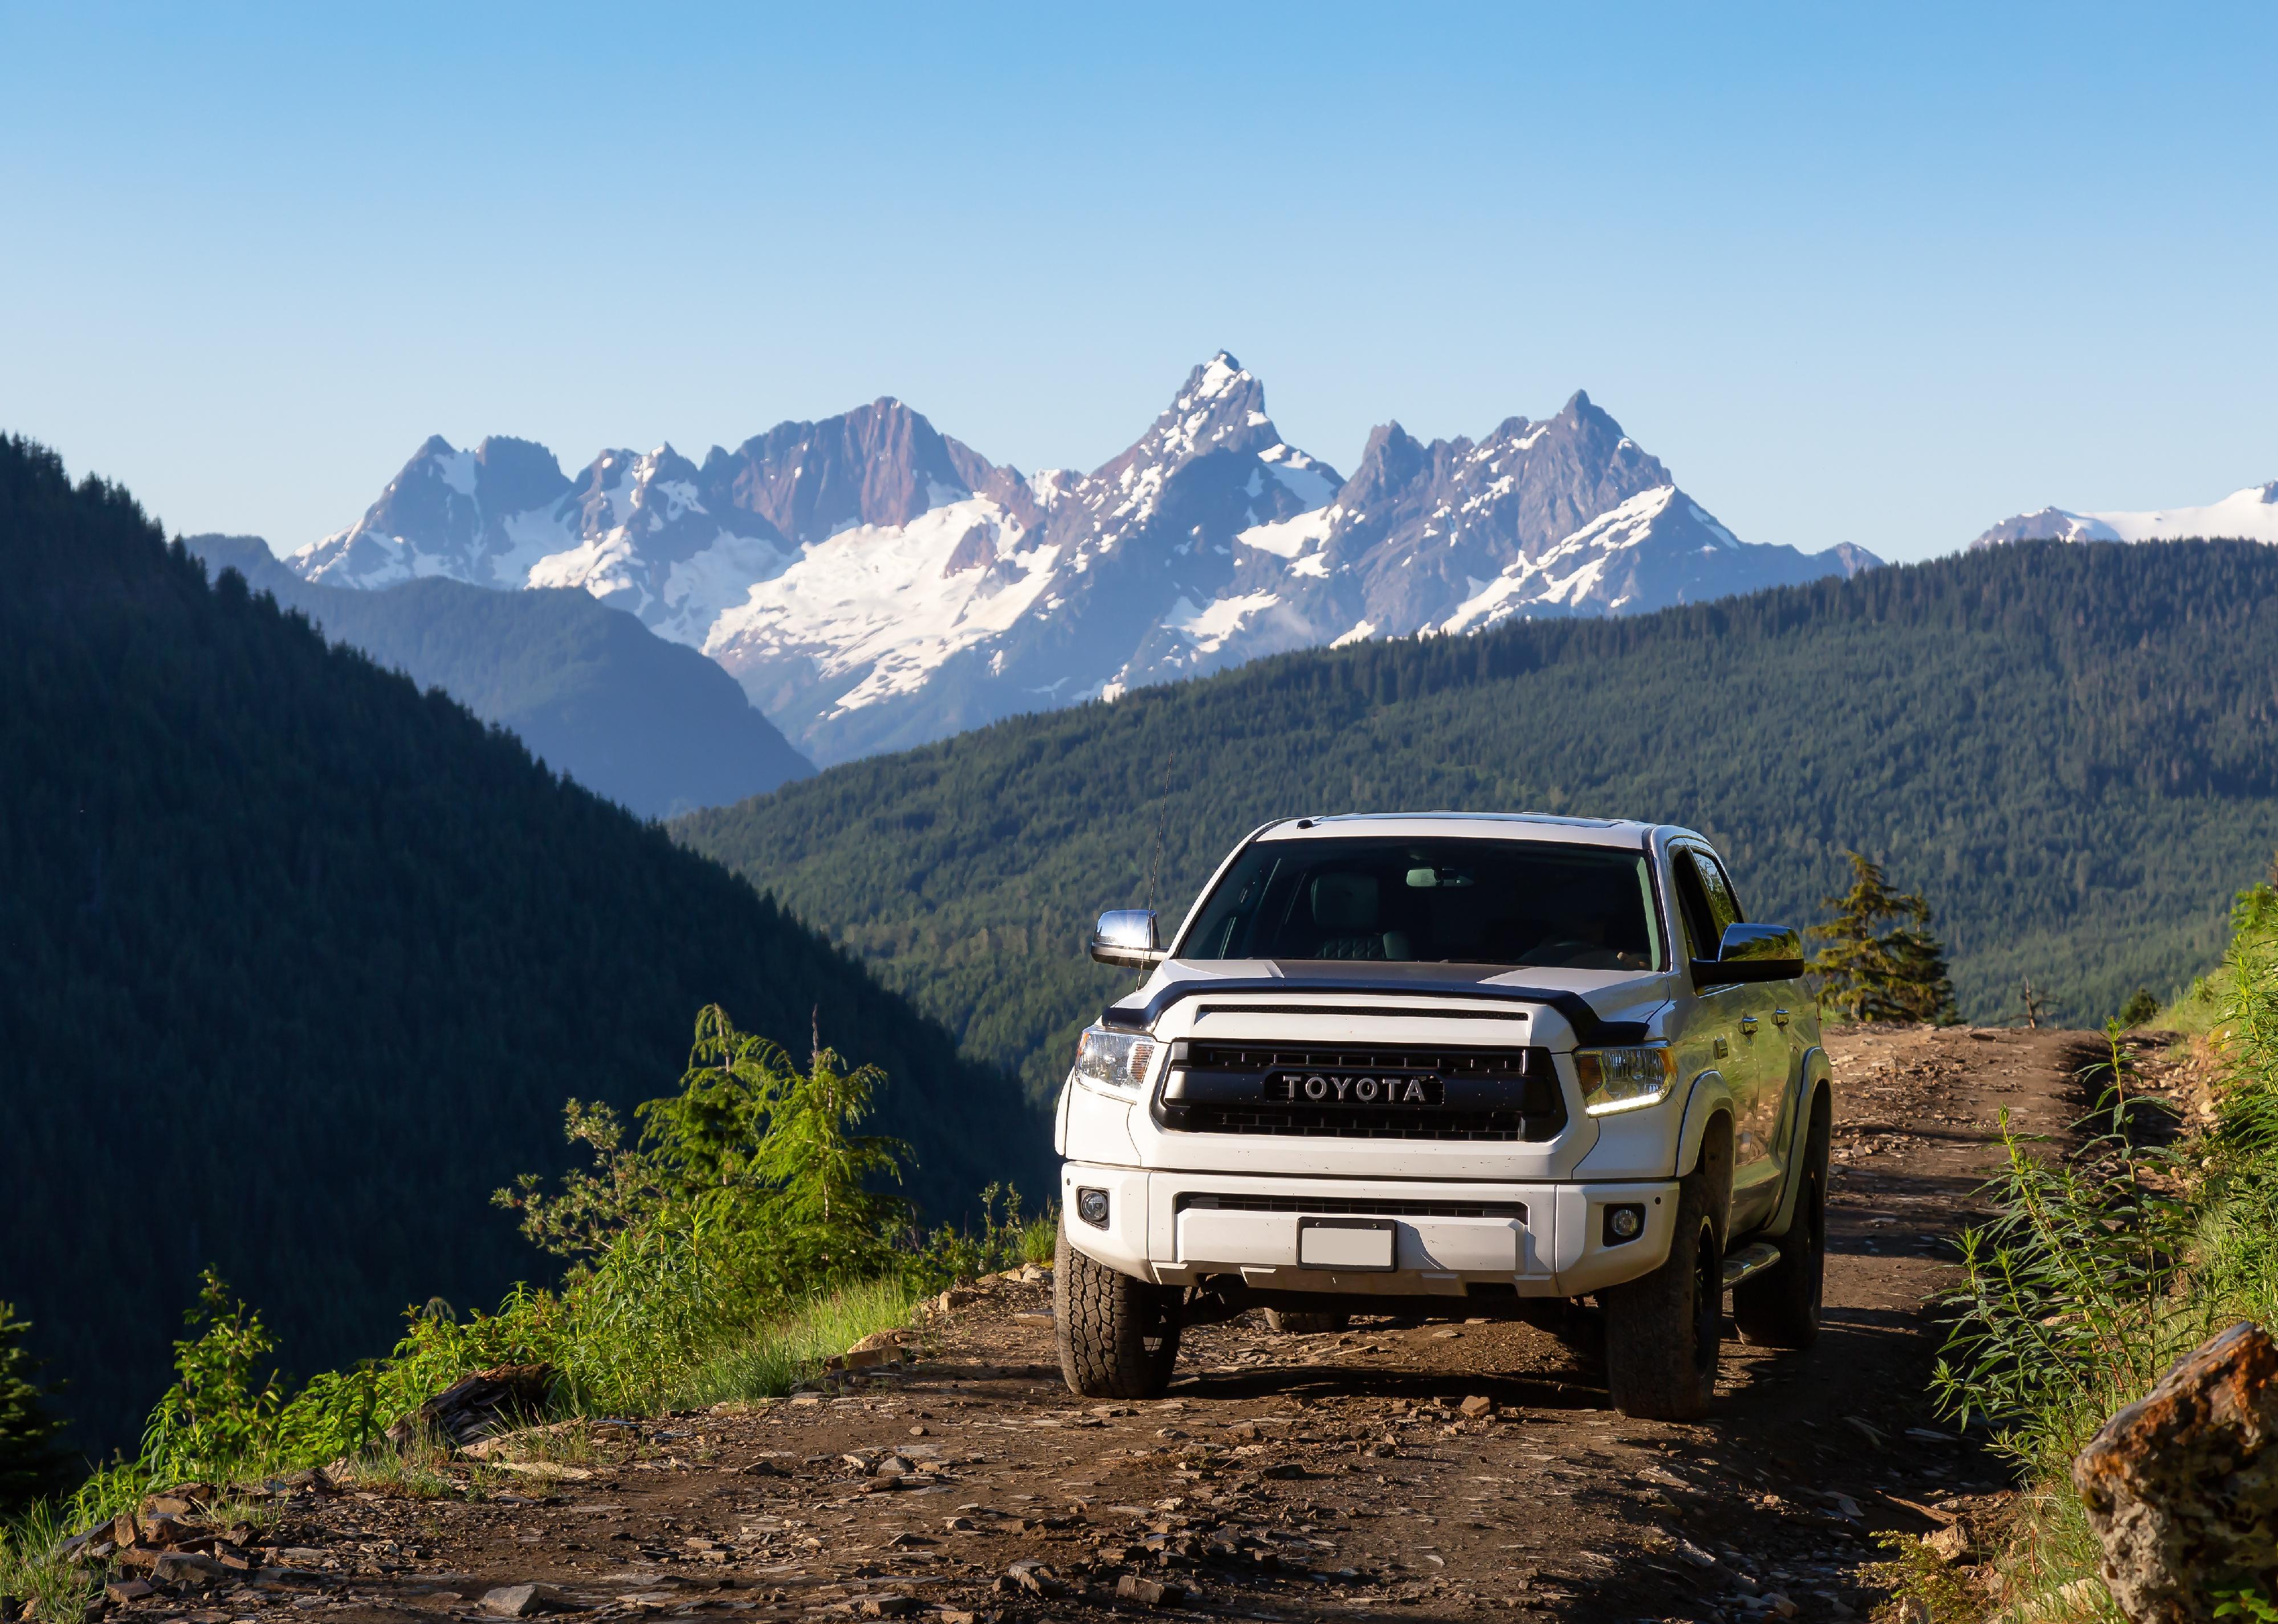 Toyota Tacoma riding on trails in the mountains during a sunny morning.